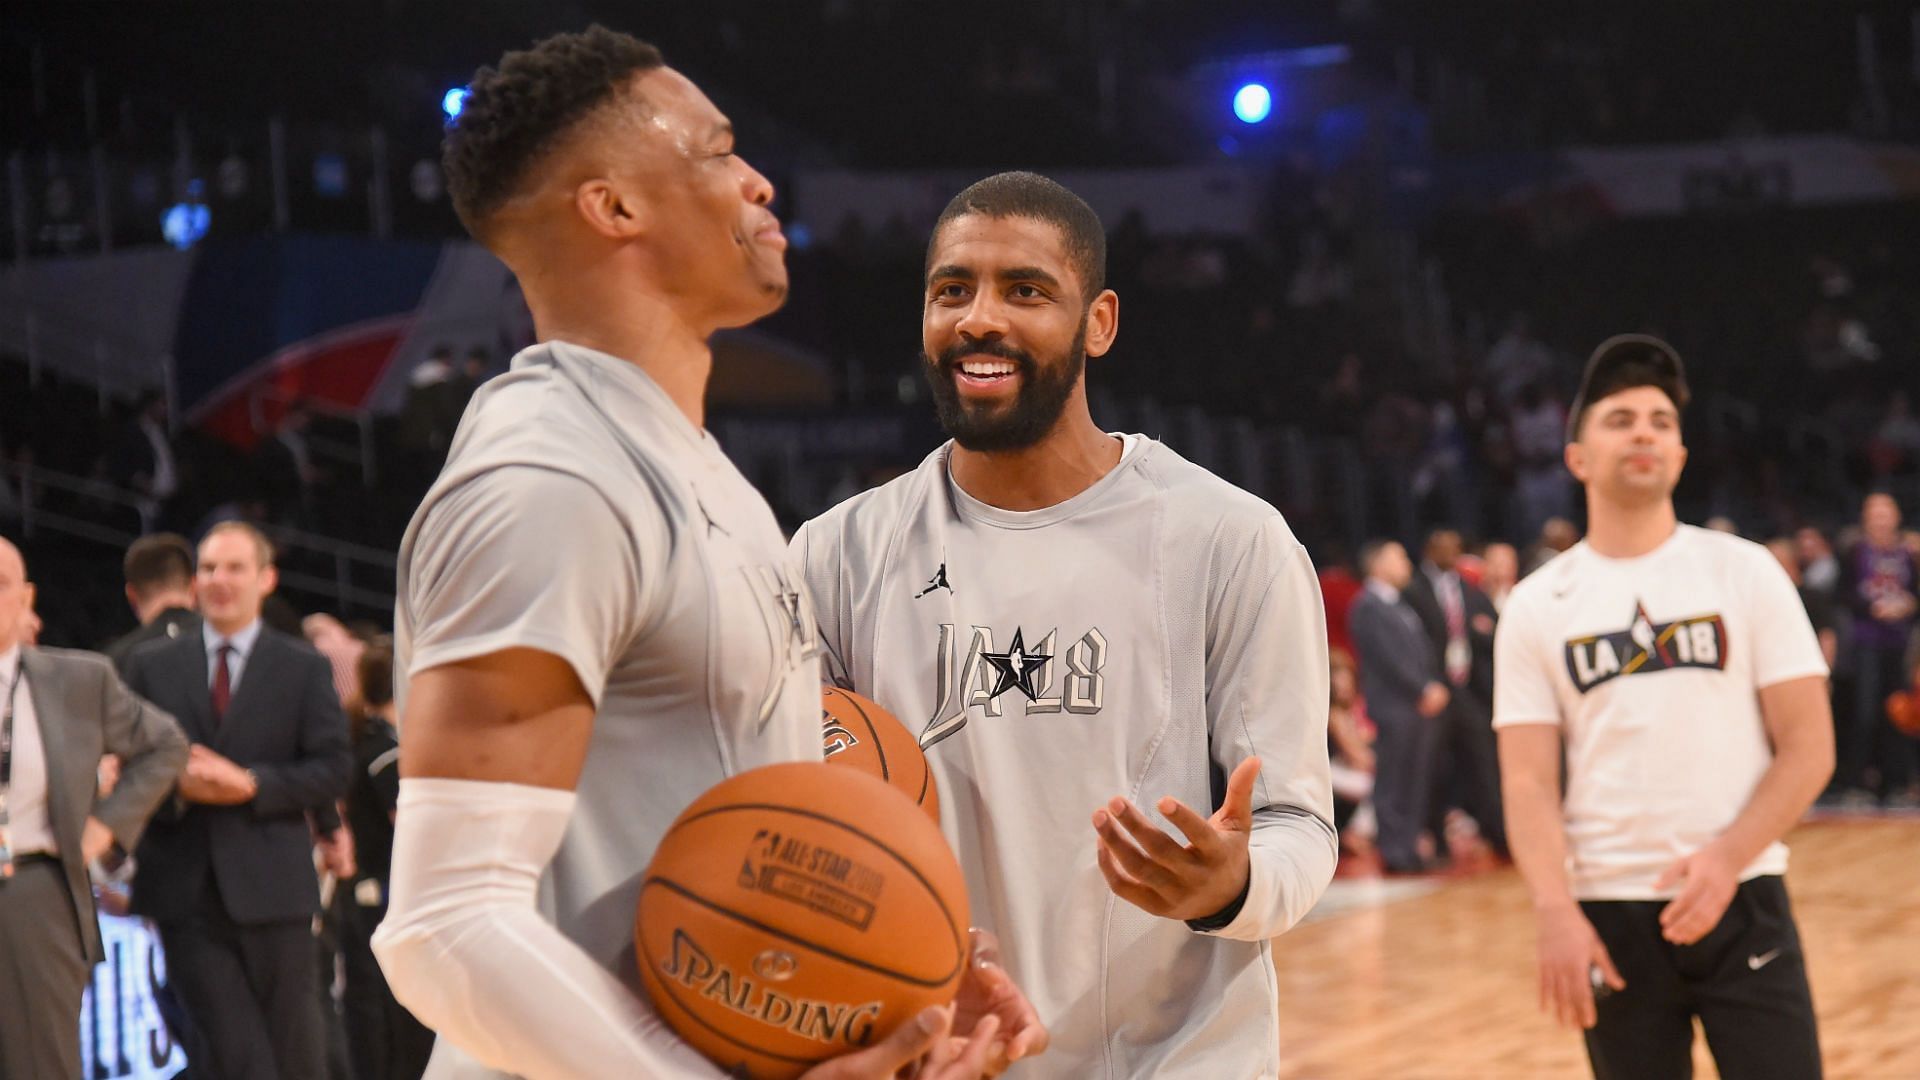 Rusell Westbrook, left, and Kyrie Irving could end up swapping teams in the offseason.